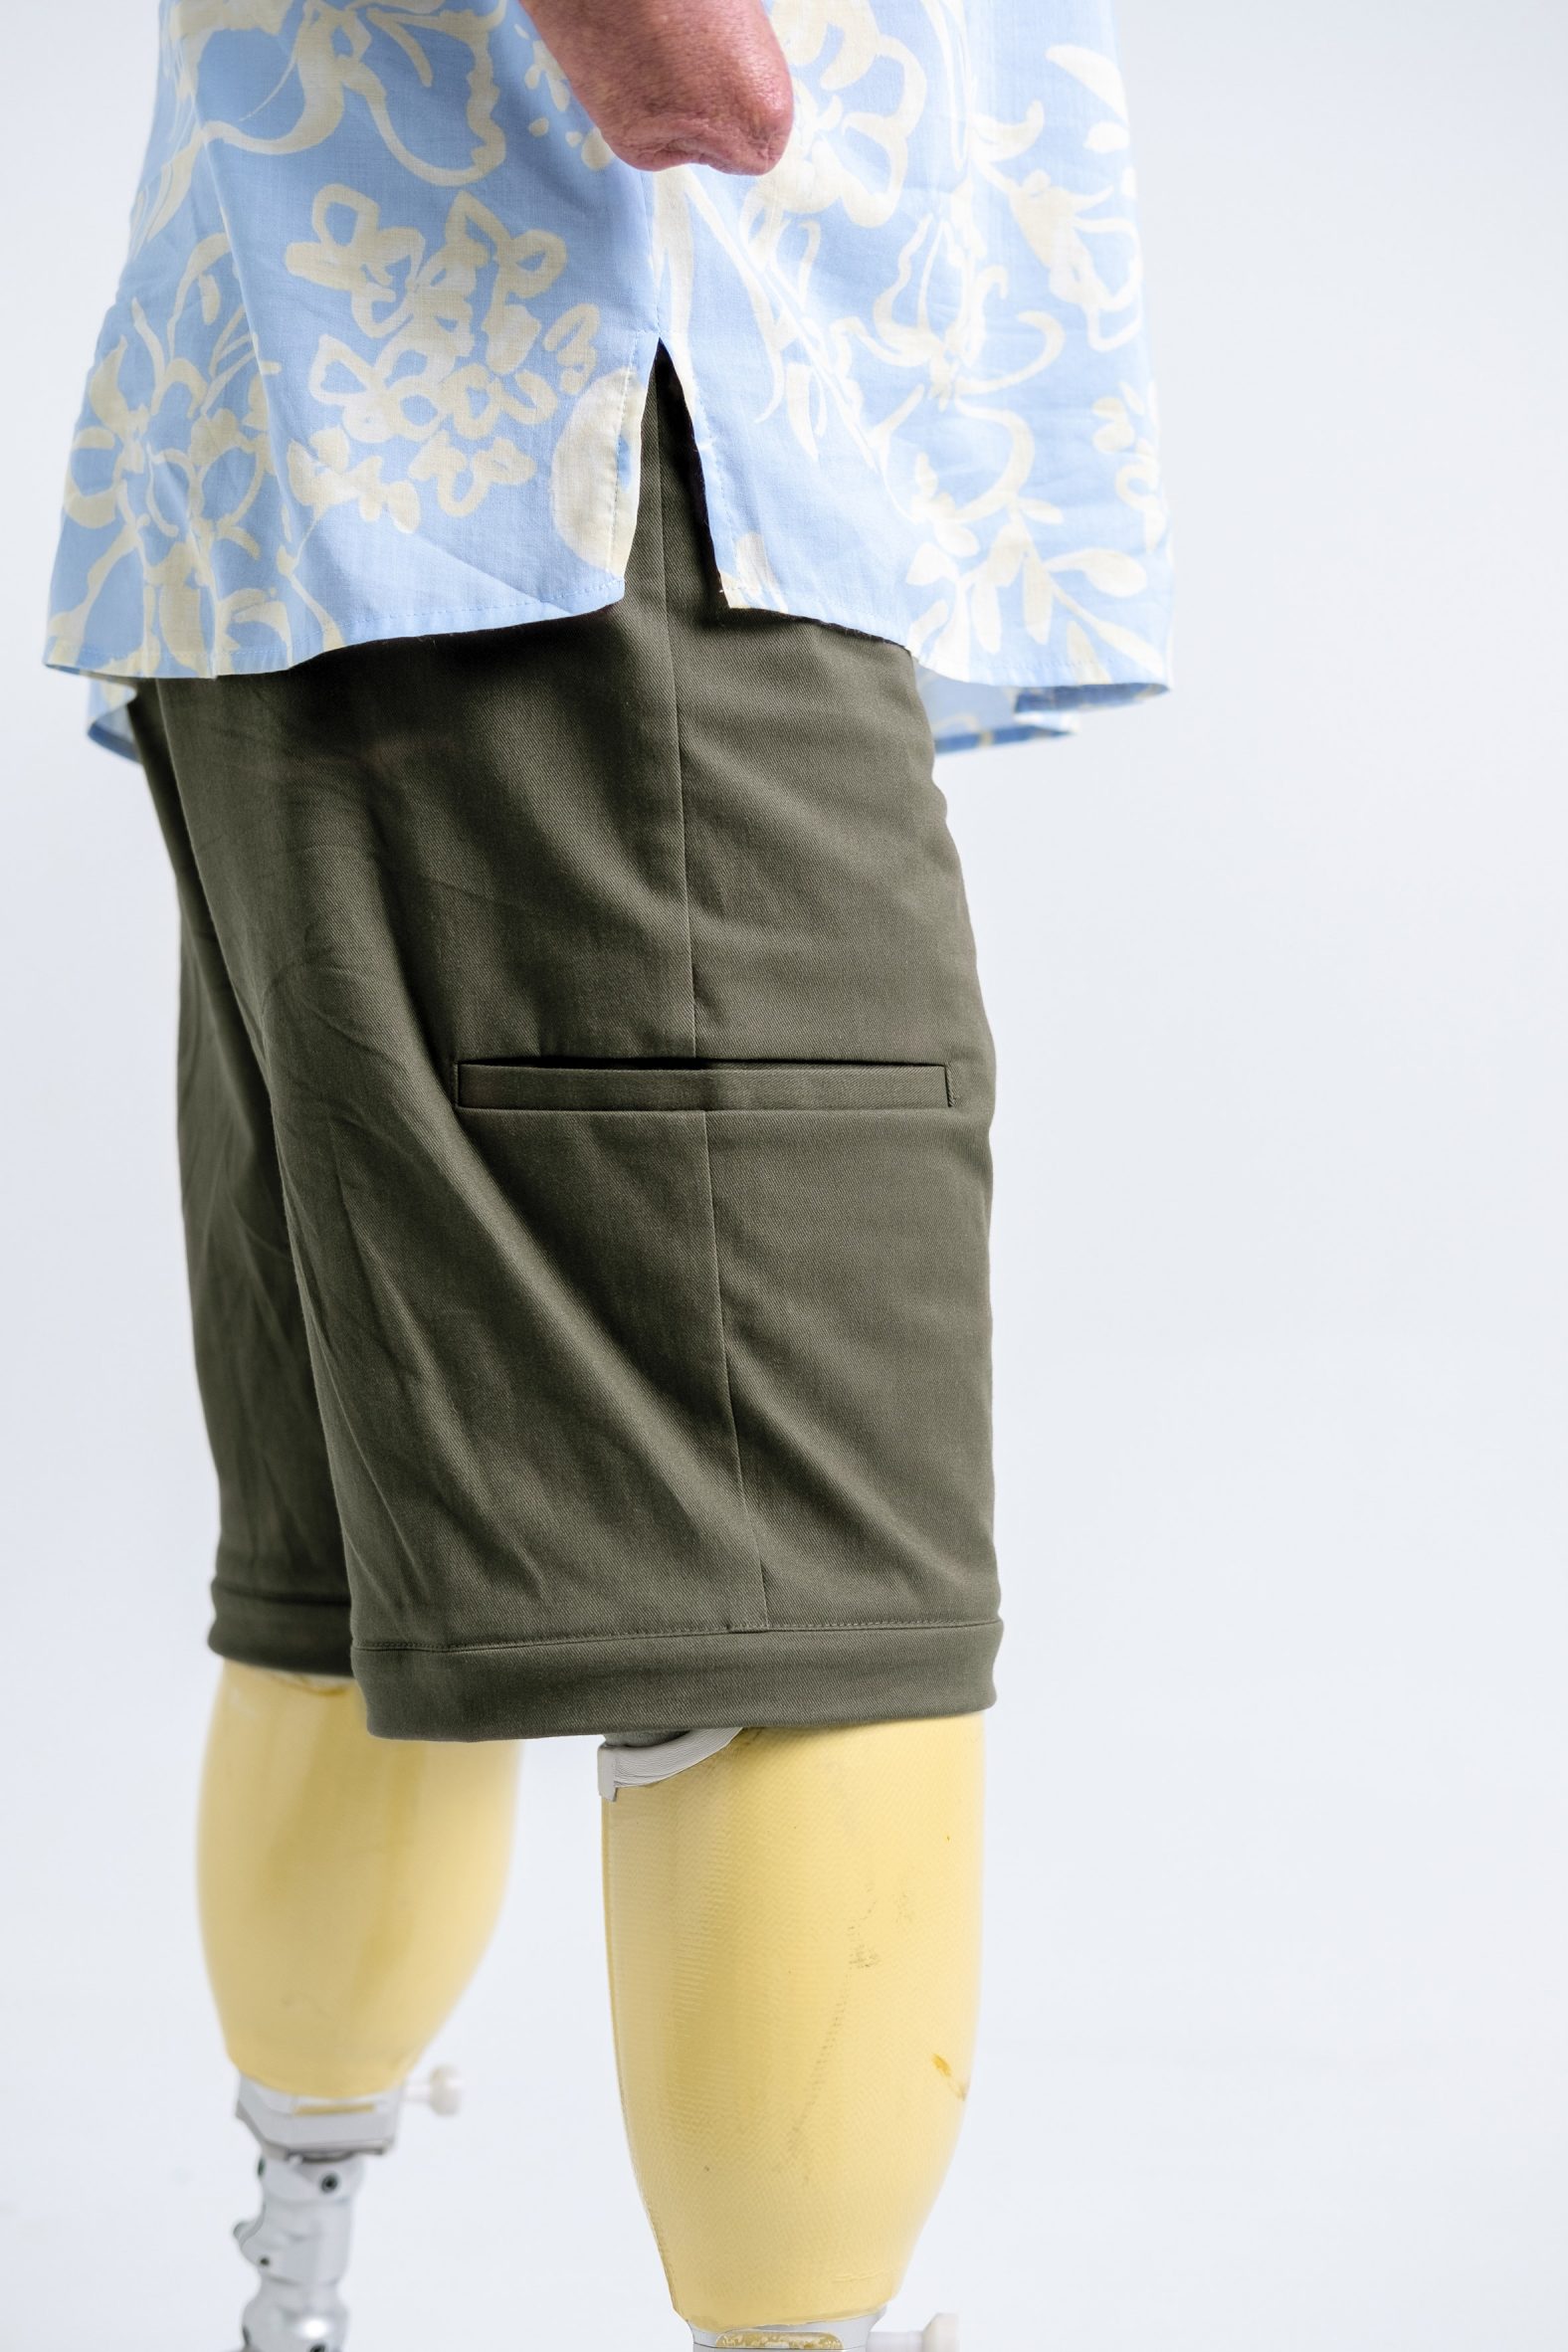 Close-up photo of a person with prosthetic legs wearing Will & Well's Convertible Cargo Pants with the bottoms zipped off to transform them into shorts